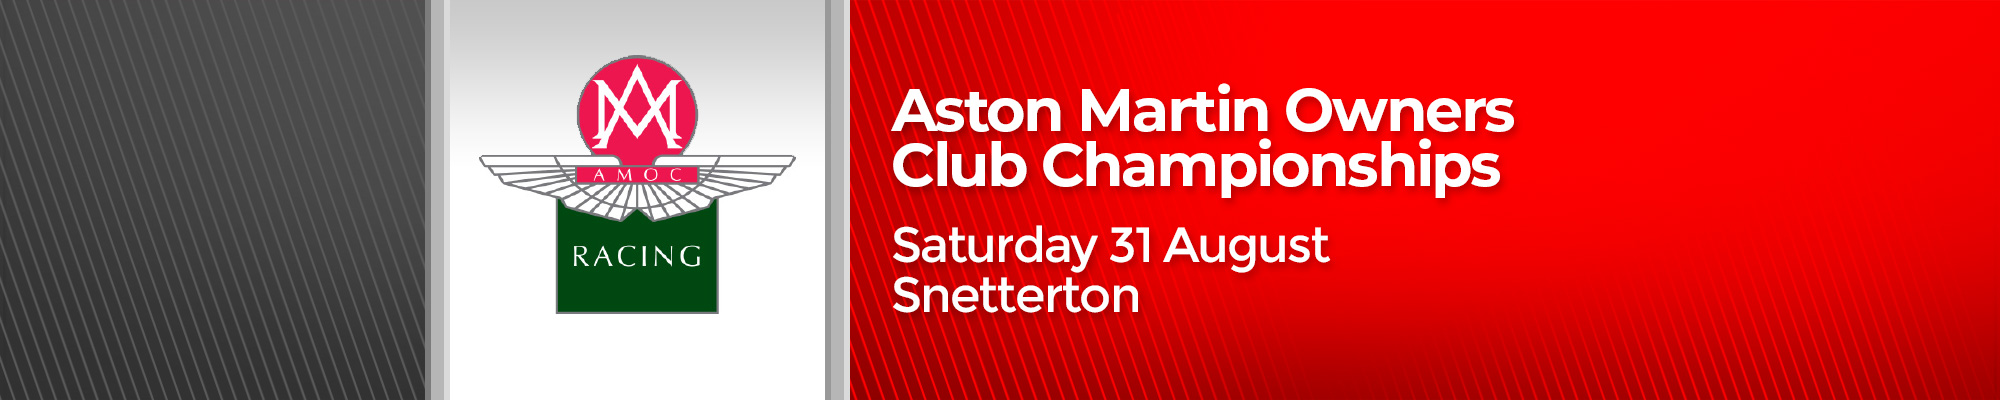 Aston Martin Owners' Club Championships